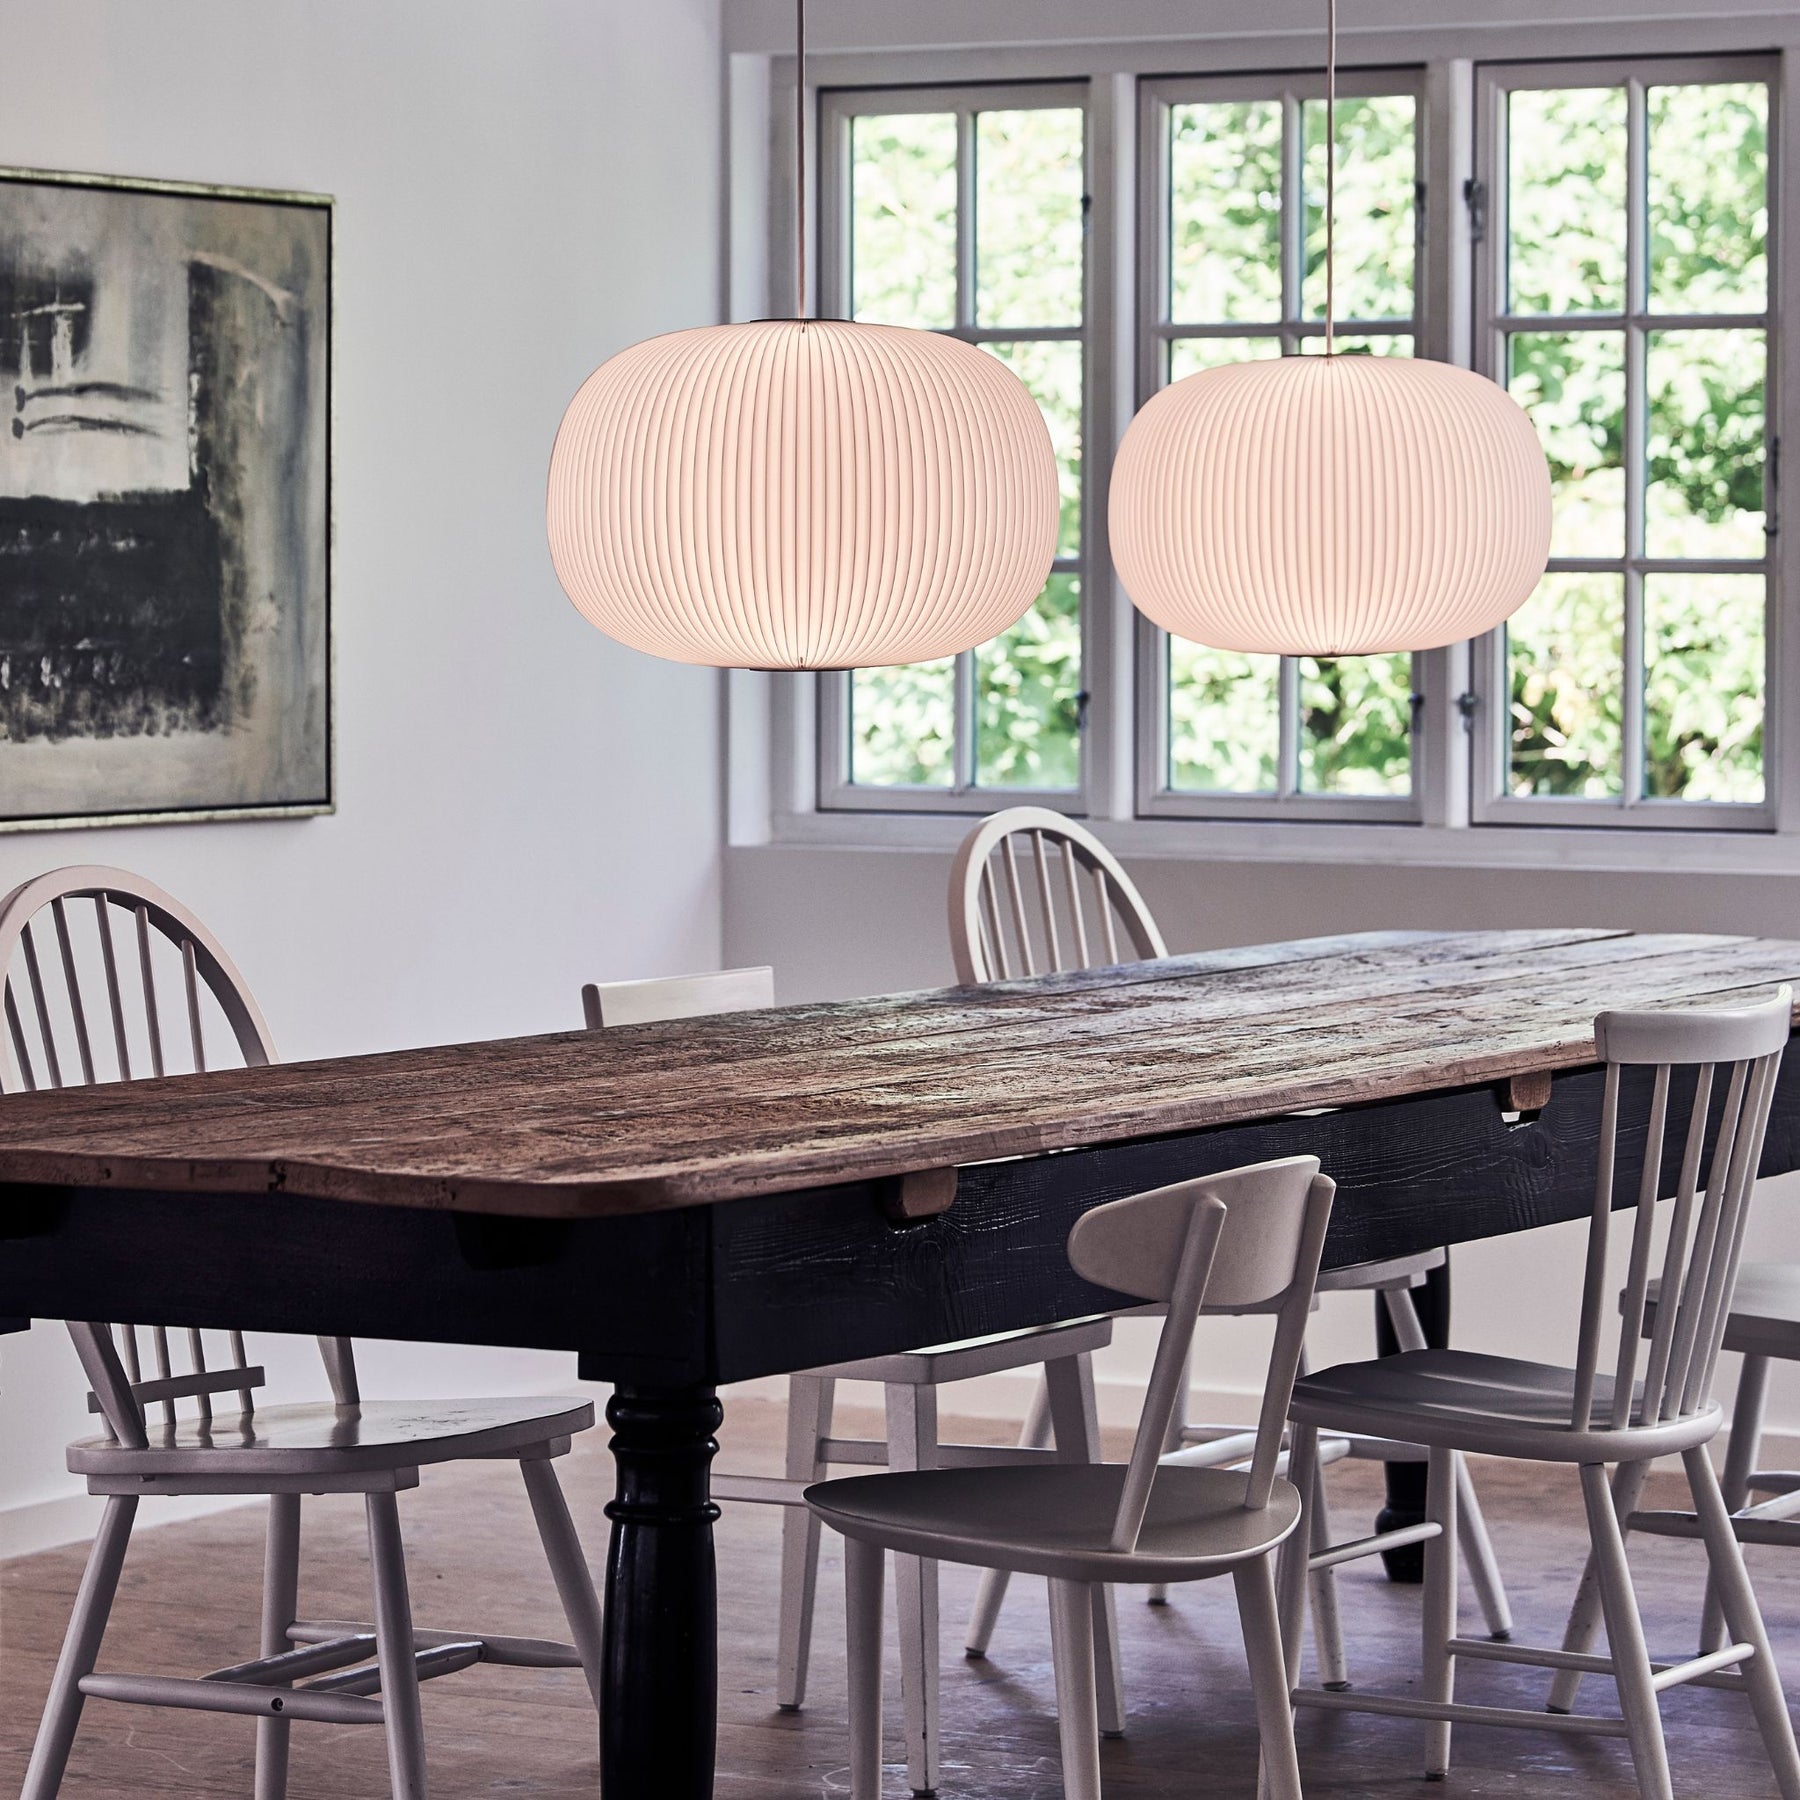 Le Klint Lamella Pendants in Danish Summer House with Rustic Farm Table and Windsor Chairs